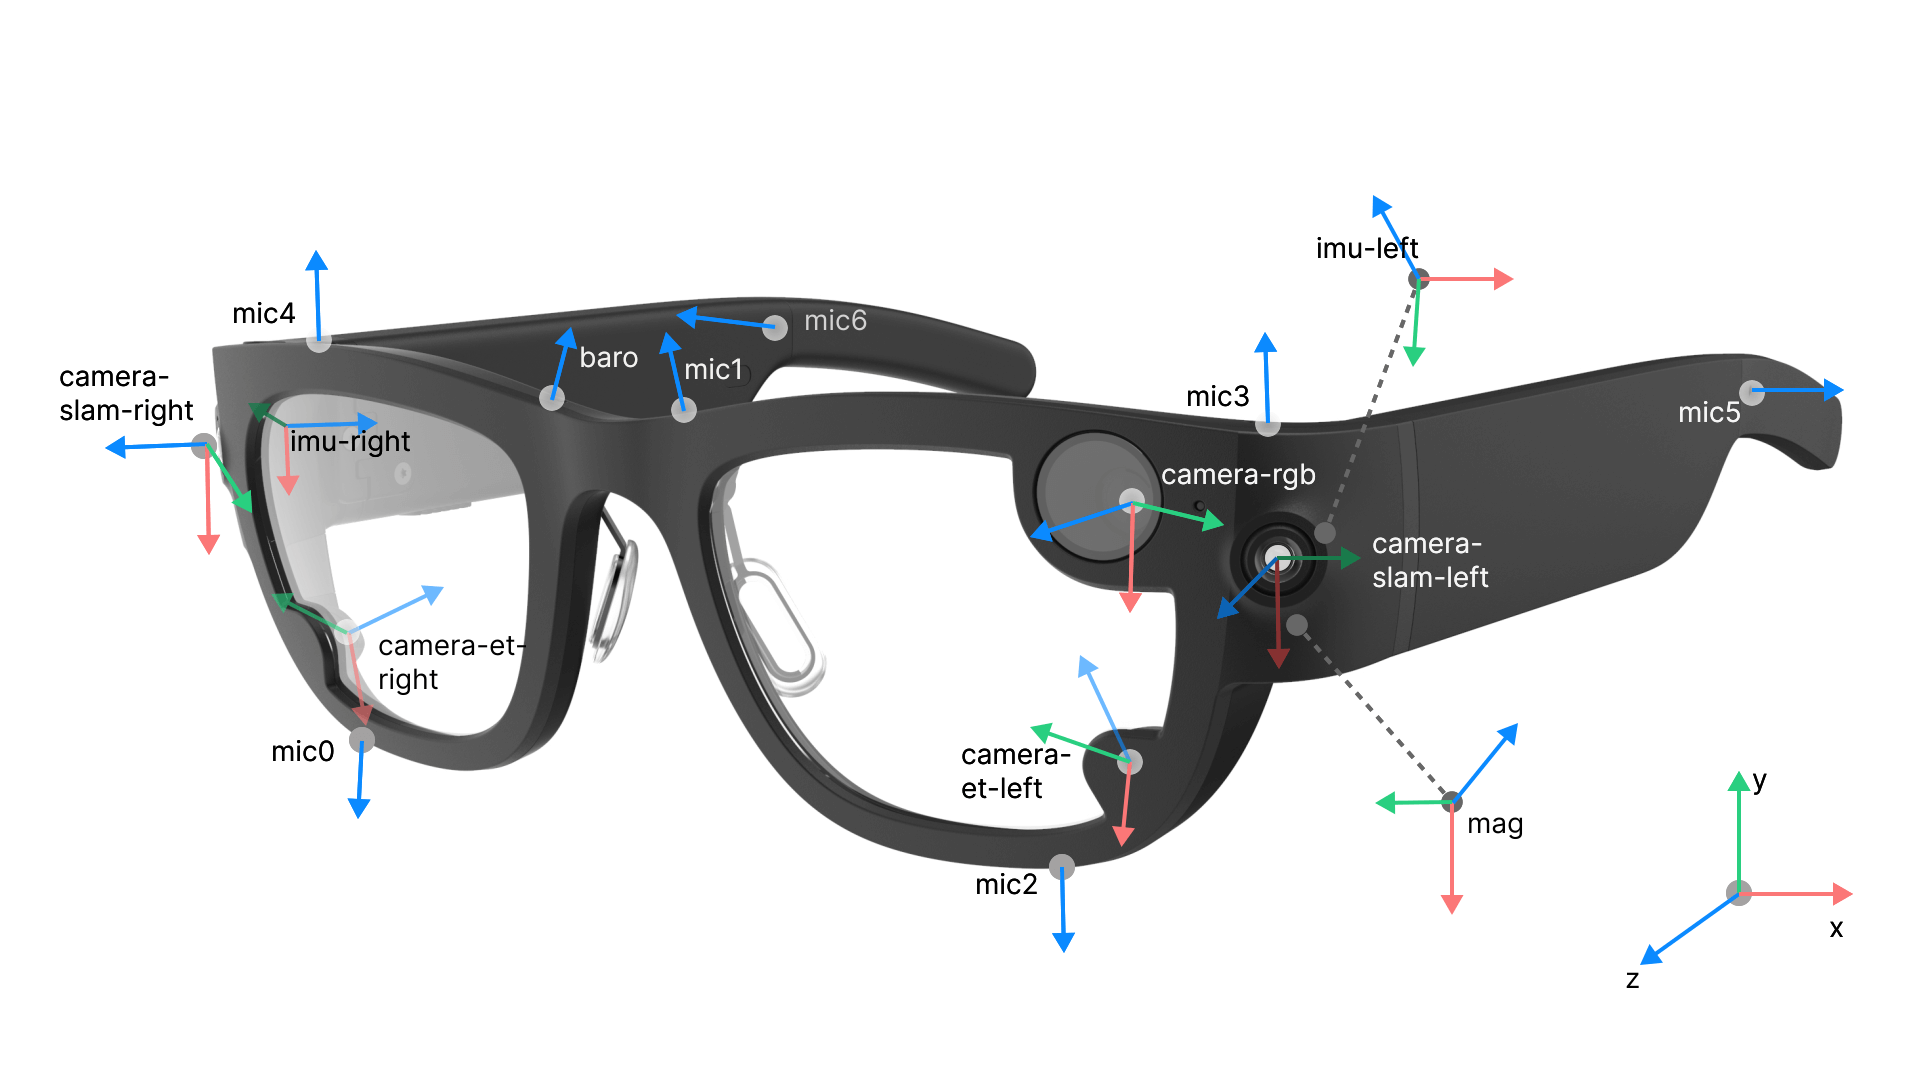 Diagram of Project Aria coordinates, showing the Optical center and the Lens FOV